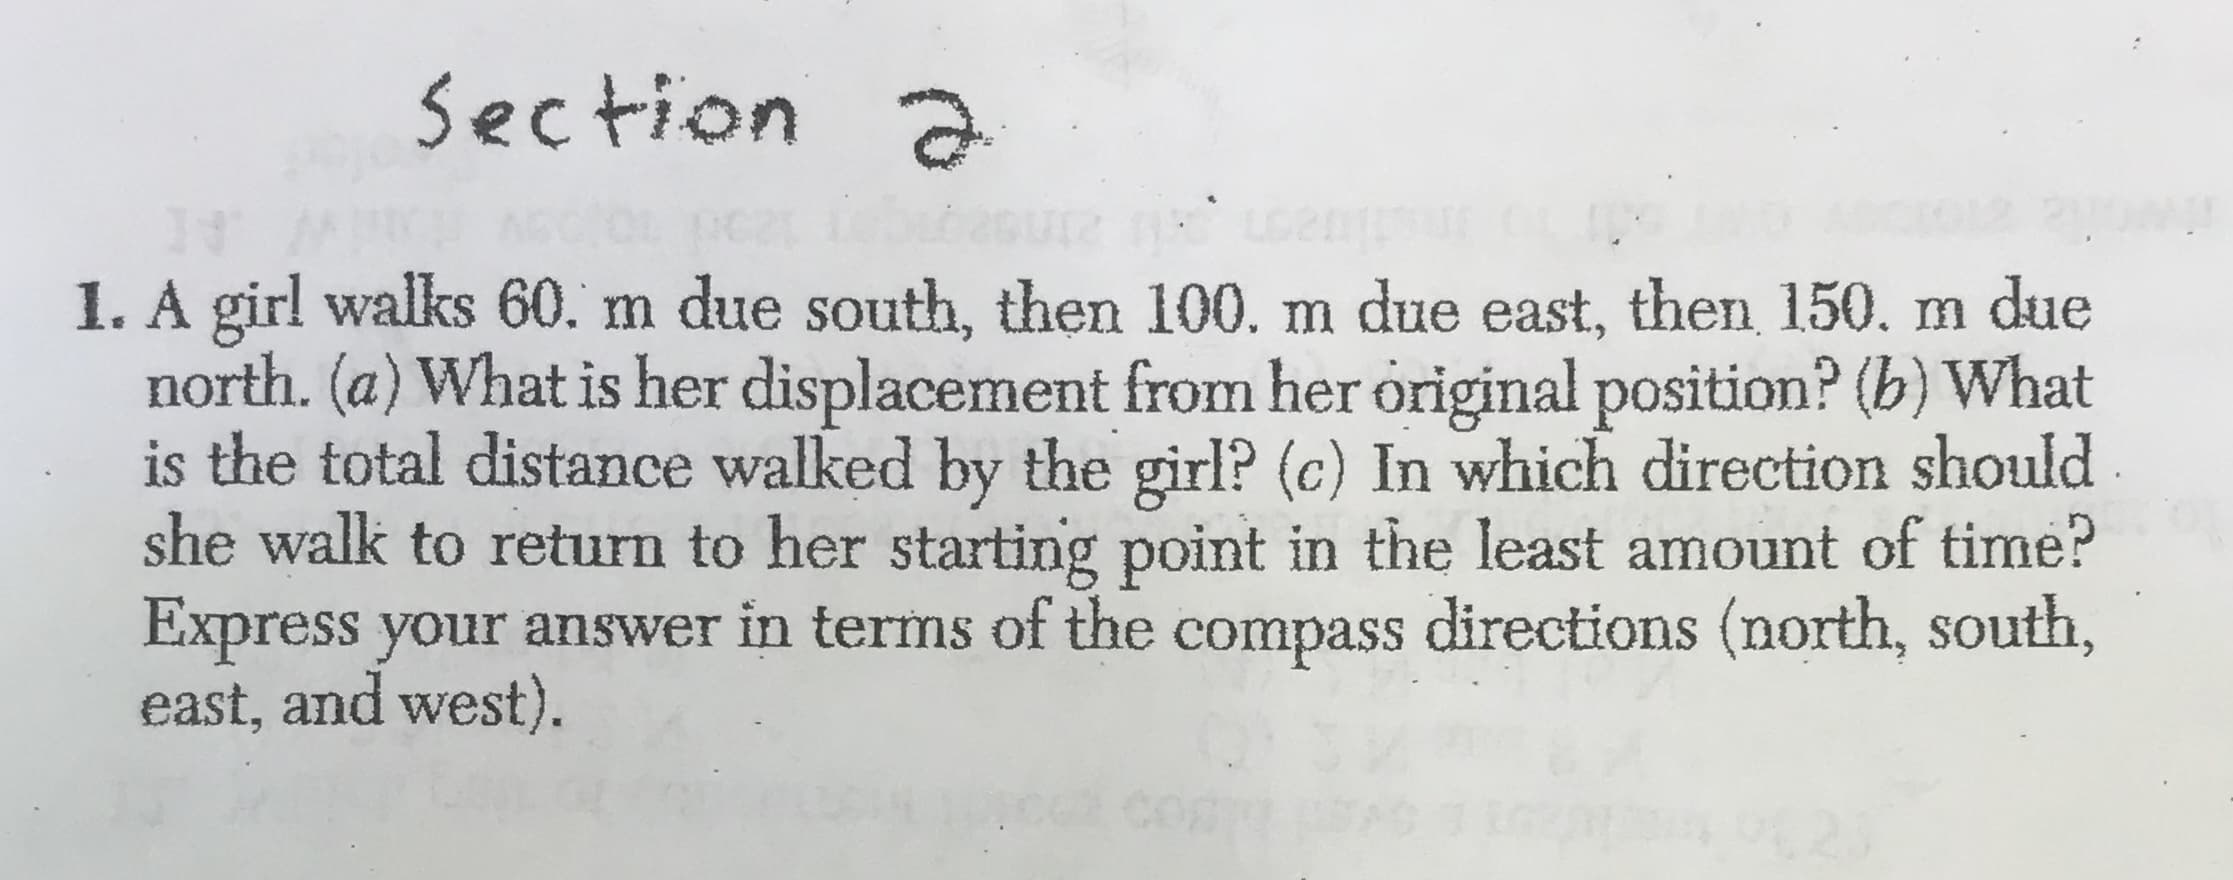 Section
1O
1. A girl walks 60. m due south, then 100. m due east, then 150. m due
north. (a) What is her displacement from her original position? (b) What
is the total distance walked by the girl? (c) In which direction should
she walk to return to her starting point in the least amount of time?
Express your answer in terms of the compass directions (north, south,
east, and west)
623
